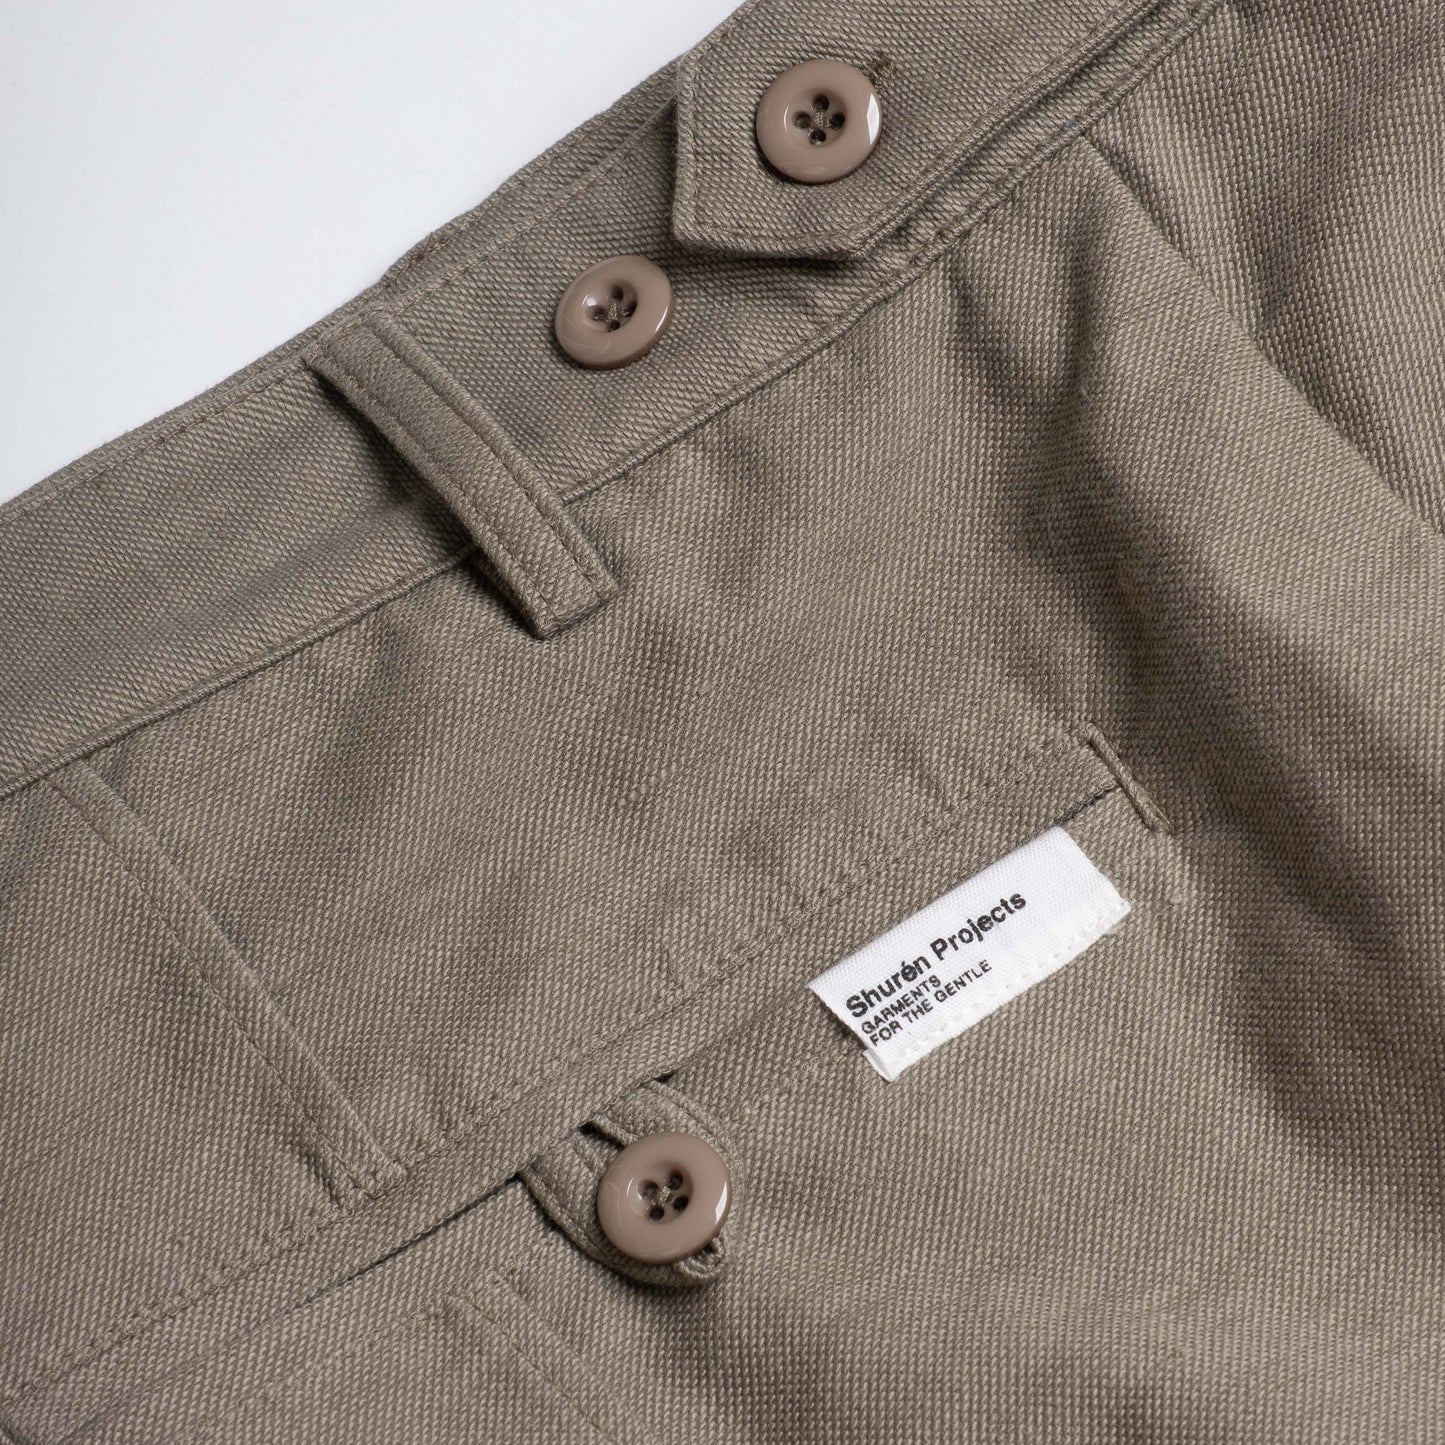 Pleated Pants / Cotton Rayon Stretch - Olive